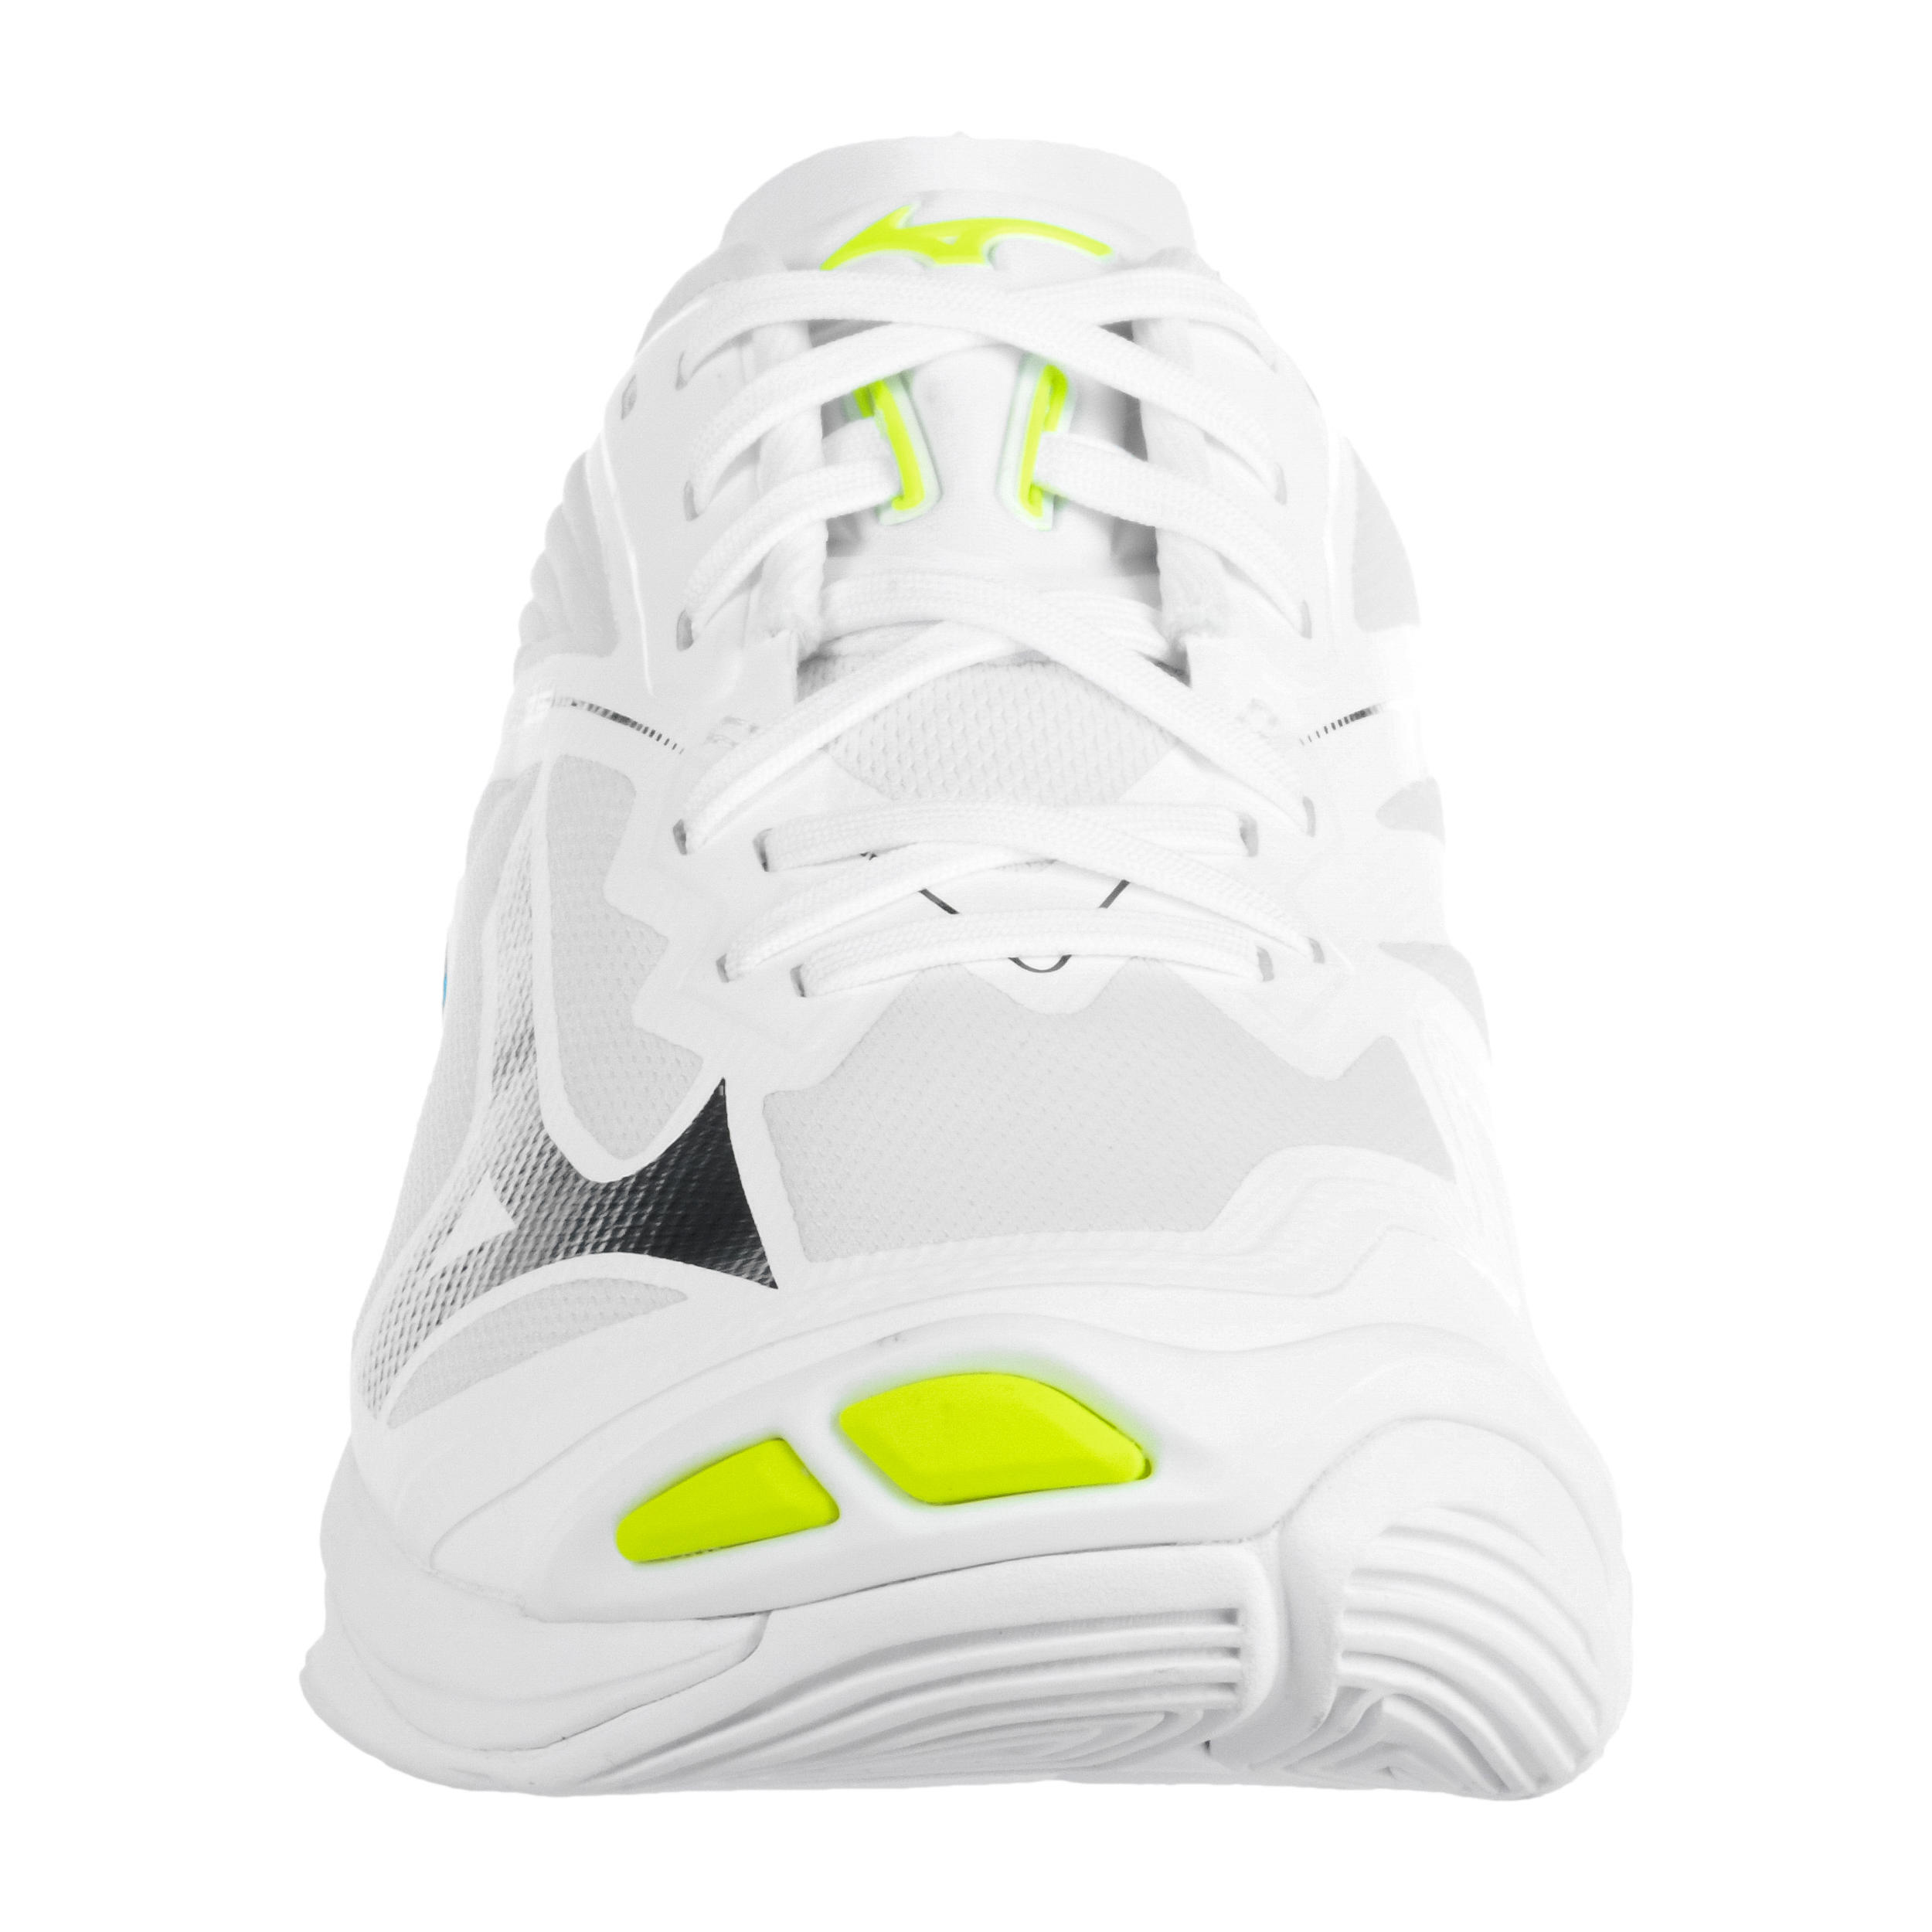 Men's Volleyball Shoes Lightning Z6 - White 5/8